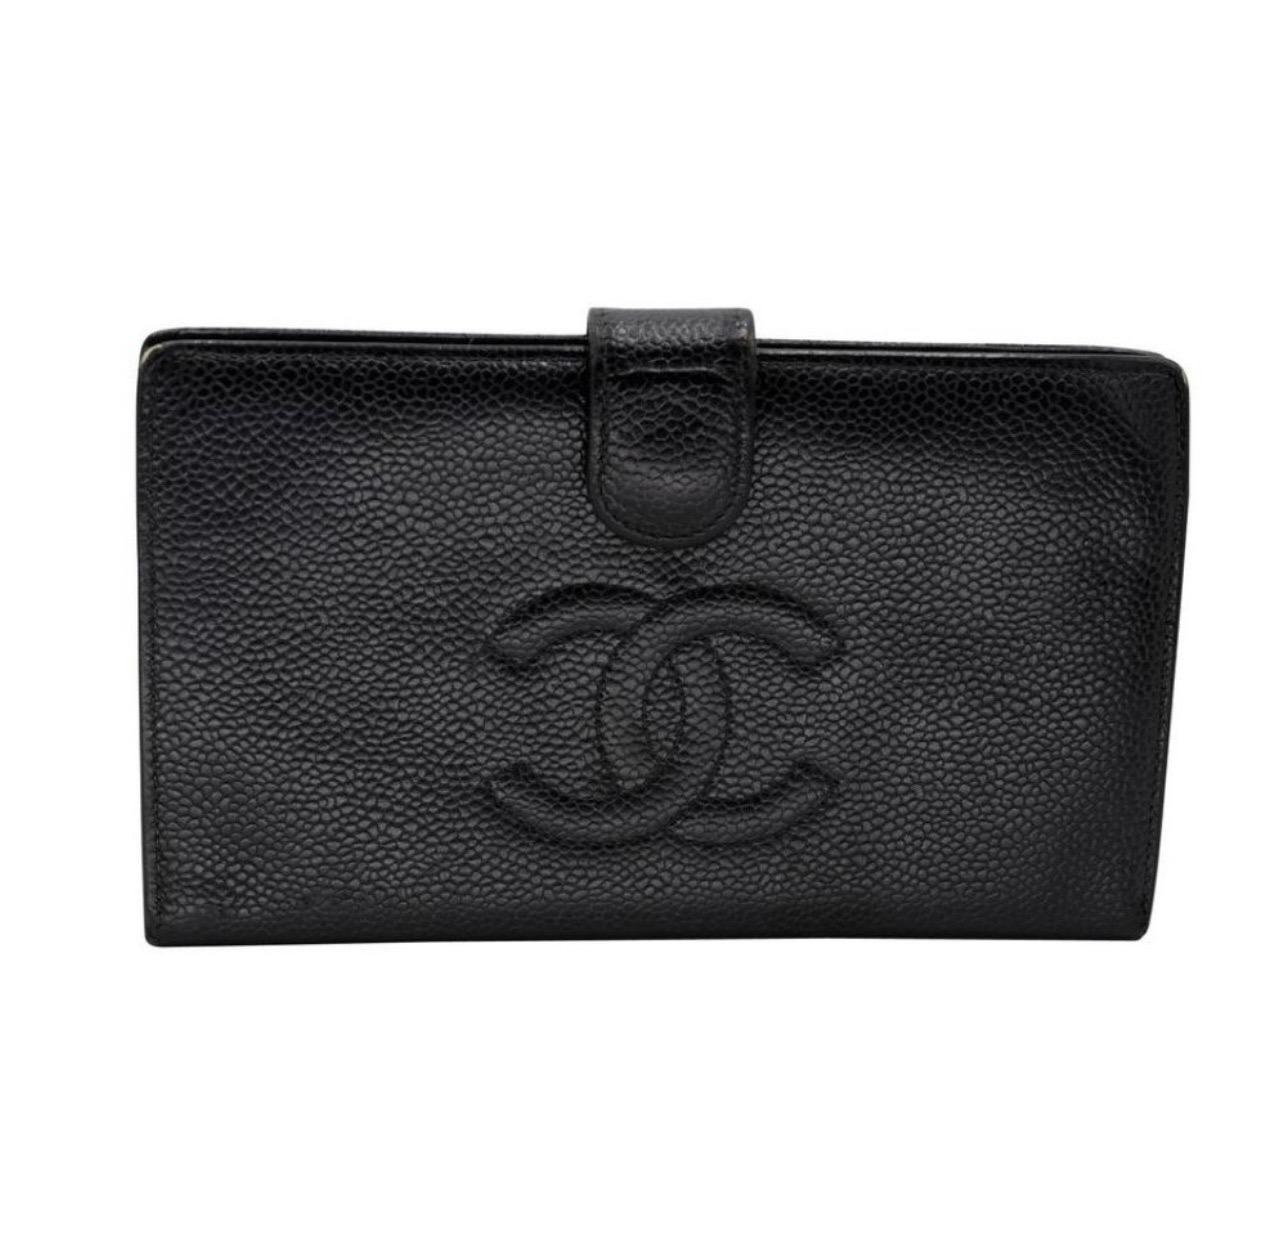 Chanel Black Caviar Leather Cc-w0128p-0003 French Kisslock Wallet with BOX 10